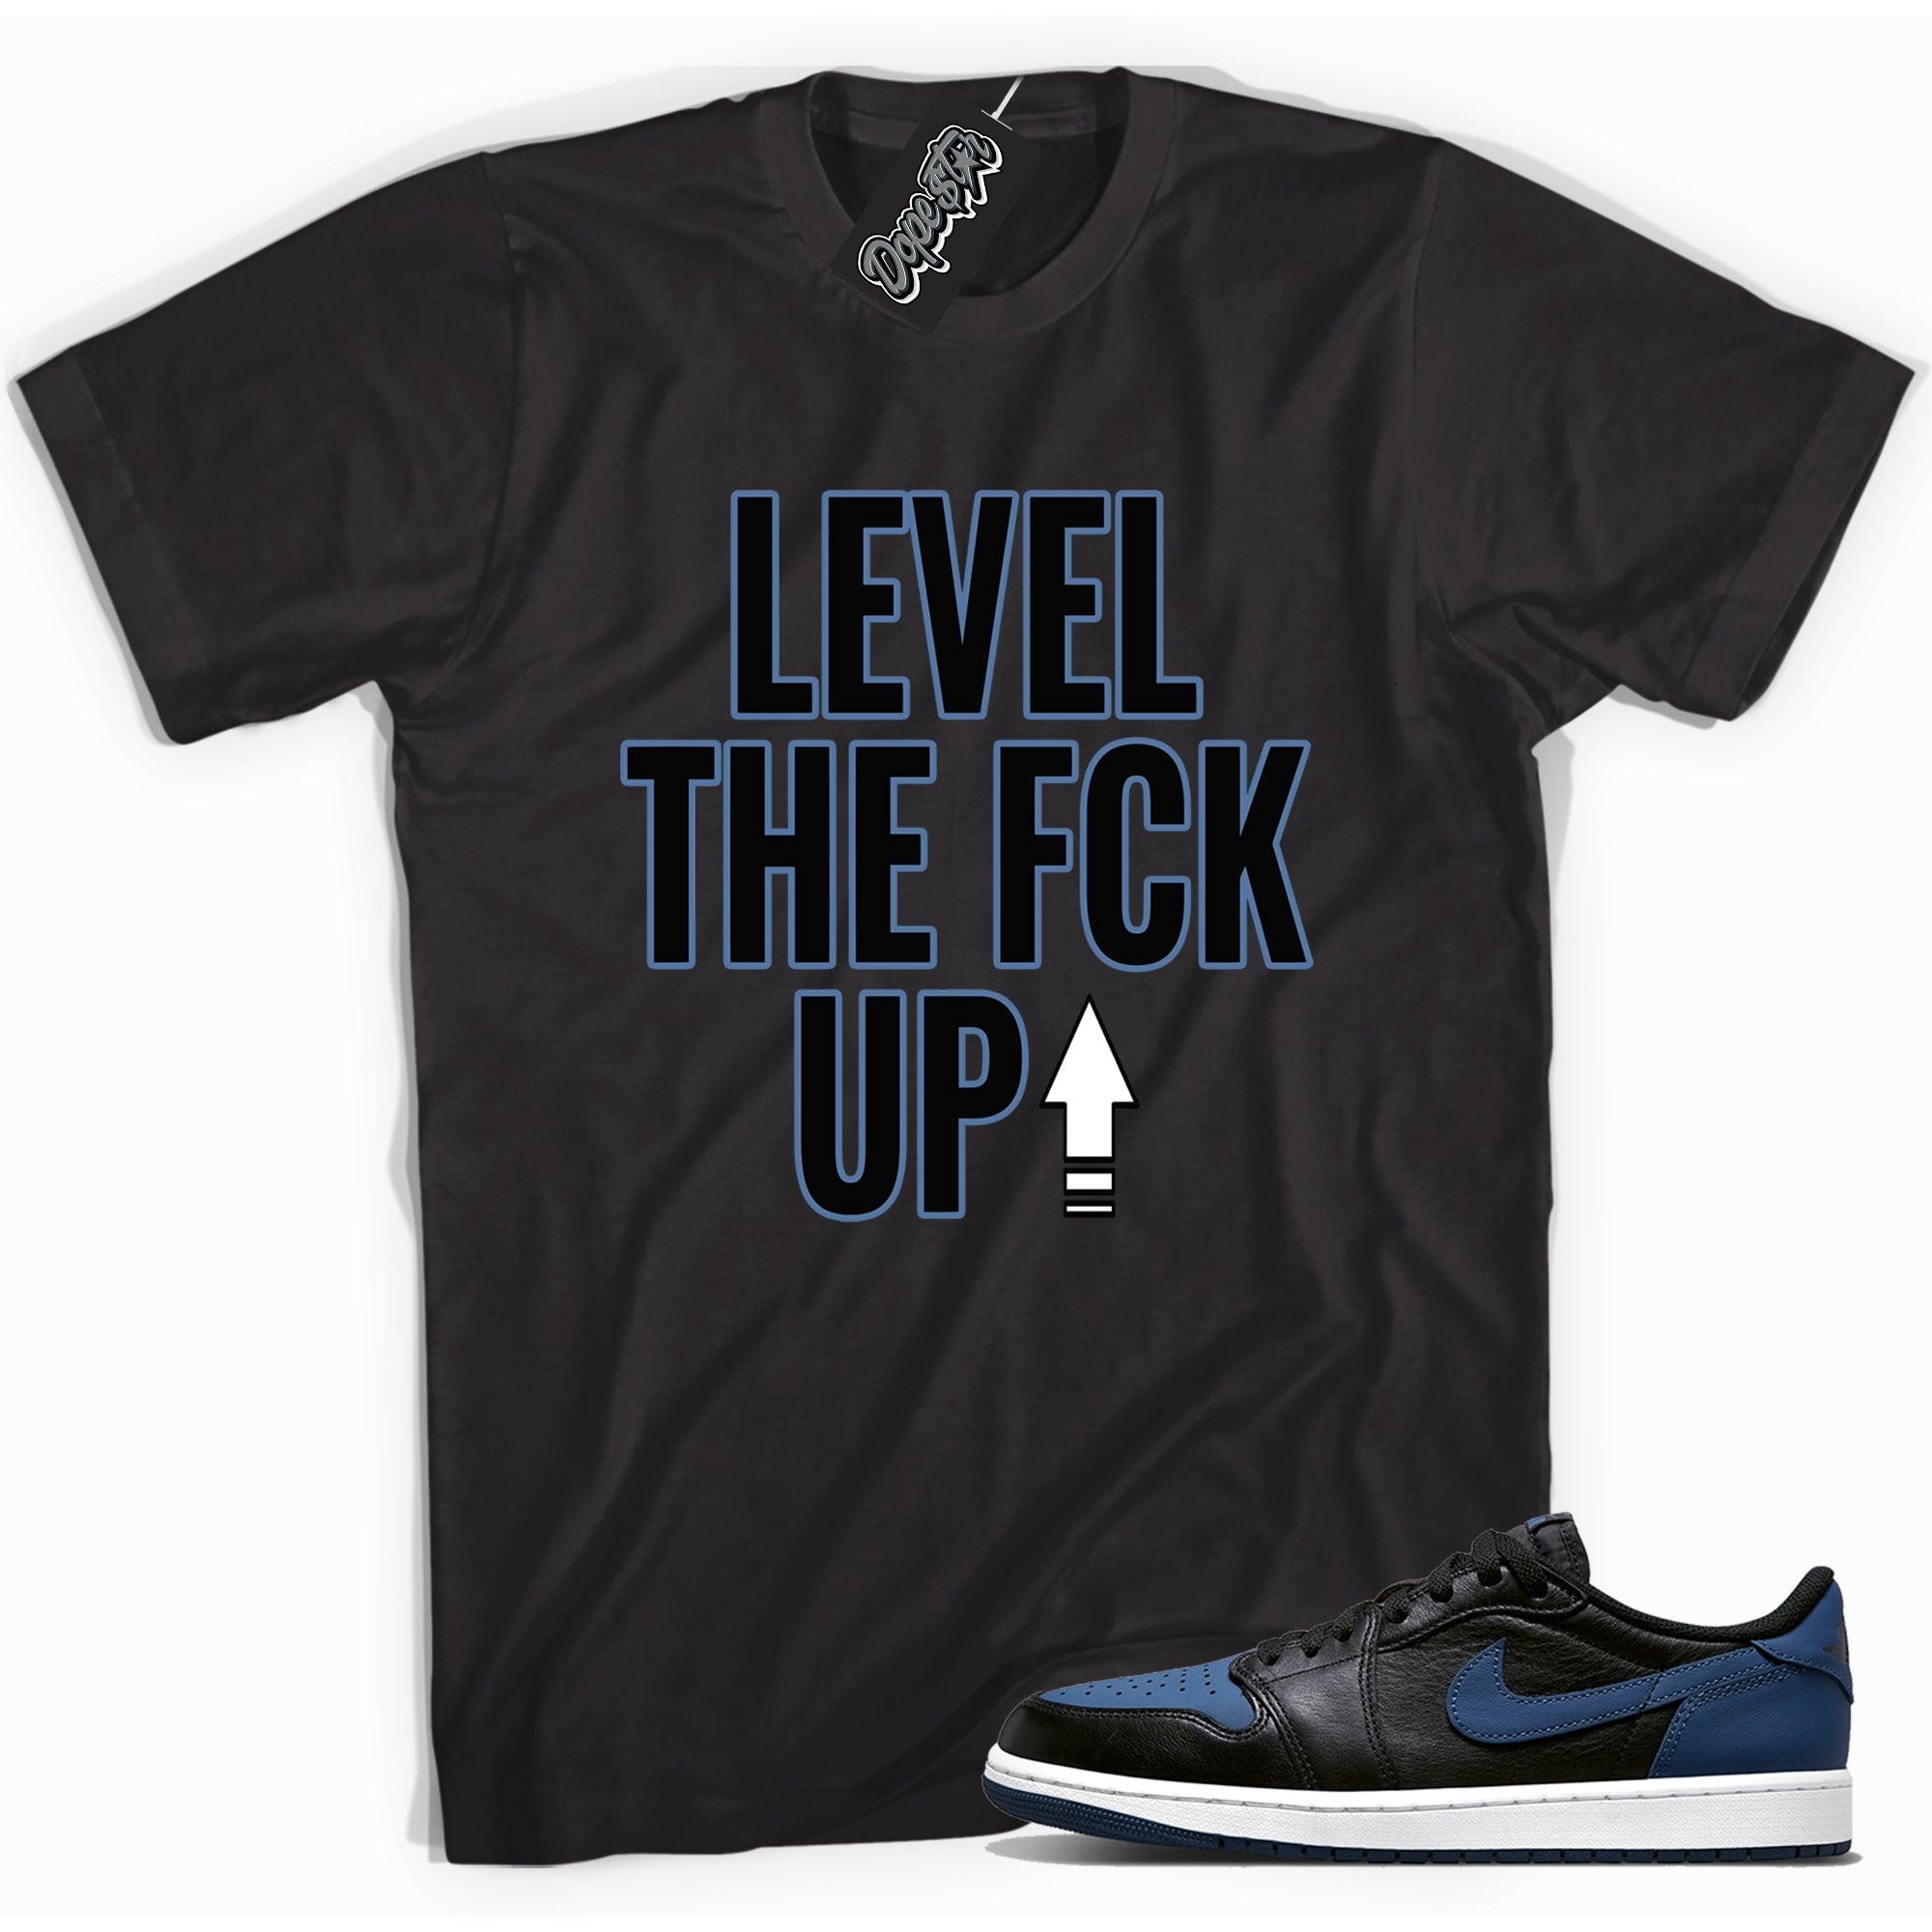 Cool black graphic tee with 'Level Up' print, that perfectly matches Air Jordan 1 Retro Low OG Mystic Navy sneakers.